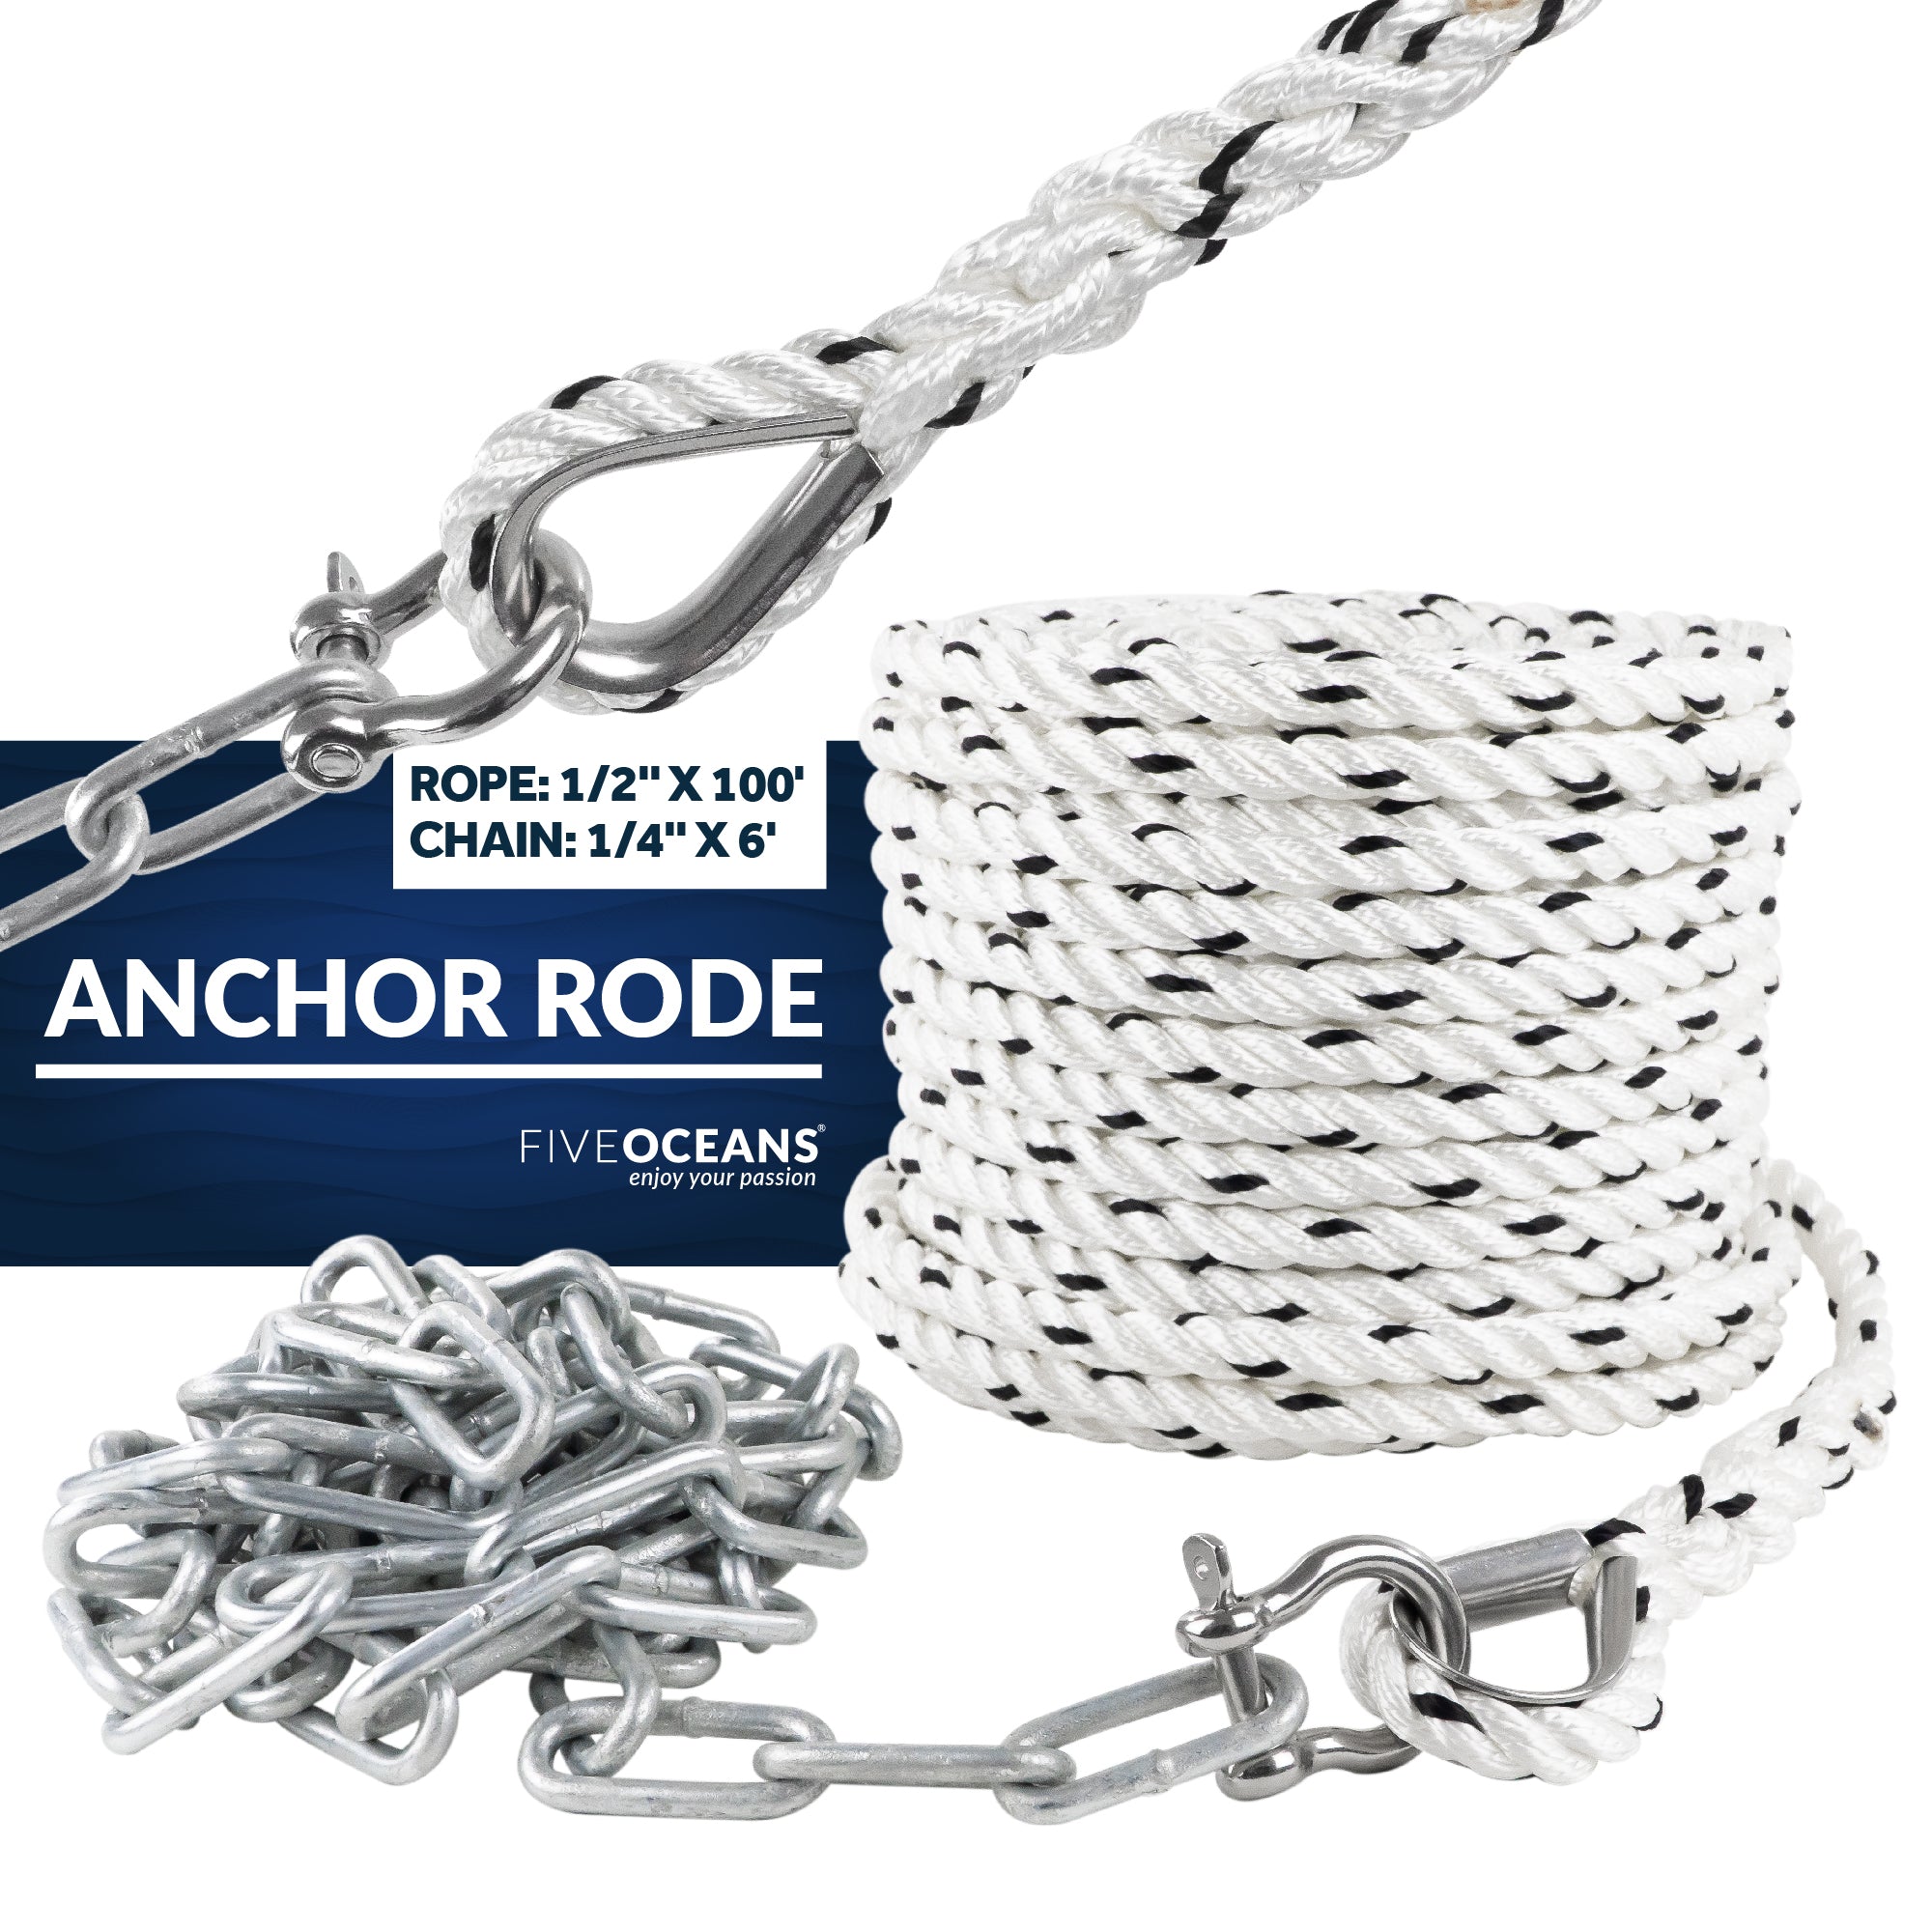 Anchor Rode, 1/2" x 100' Nylon 3-Strand Rope, 1/4" x 6' Hot Dipped Galvanized Steel Chain - FO4521